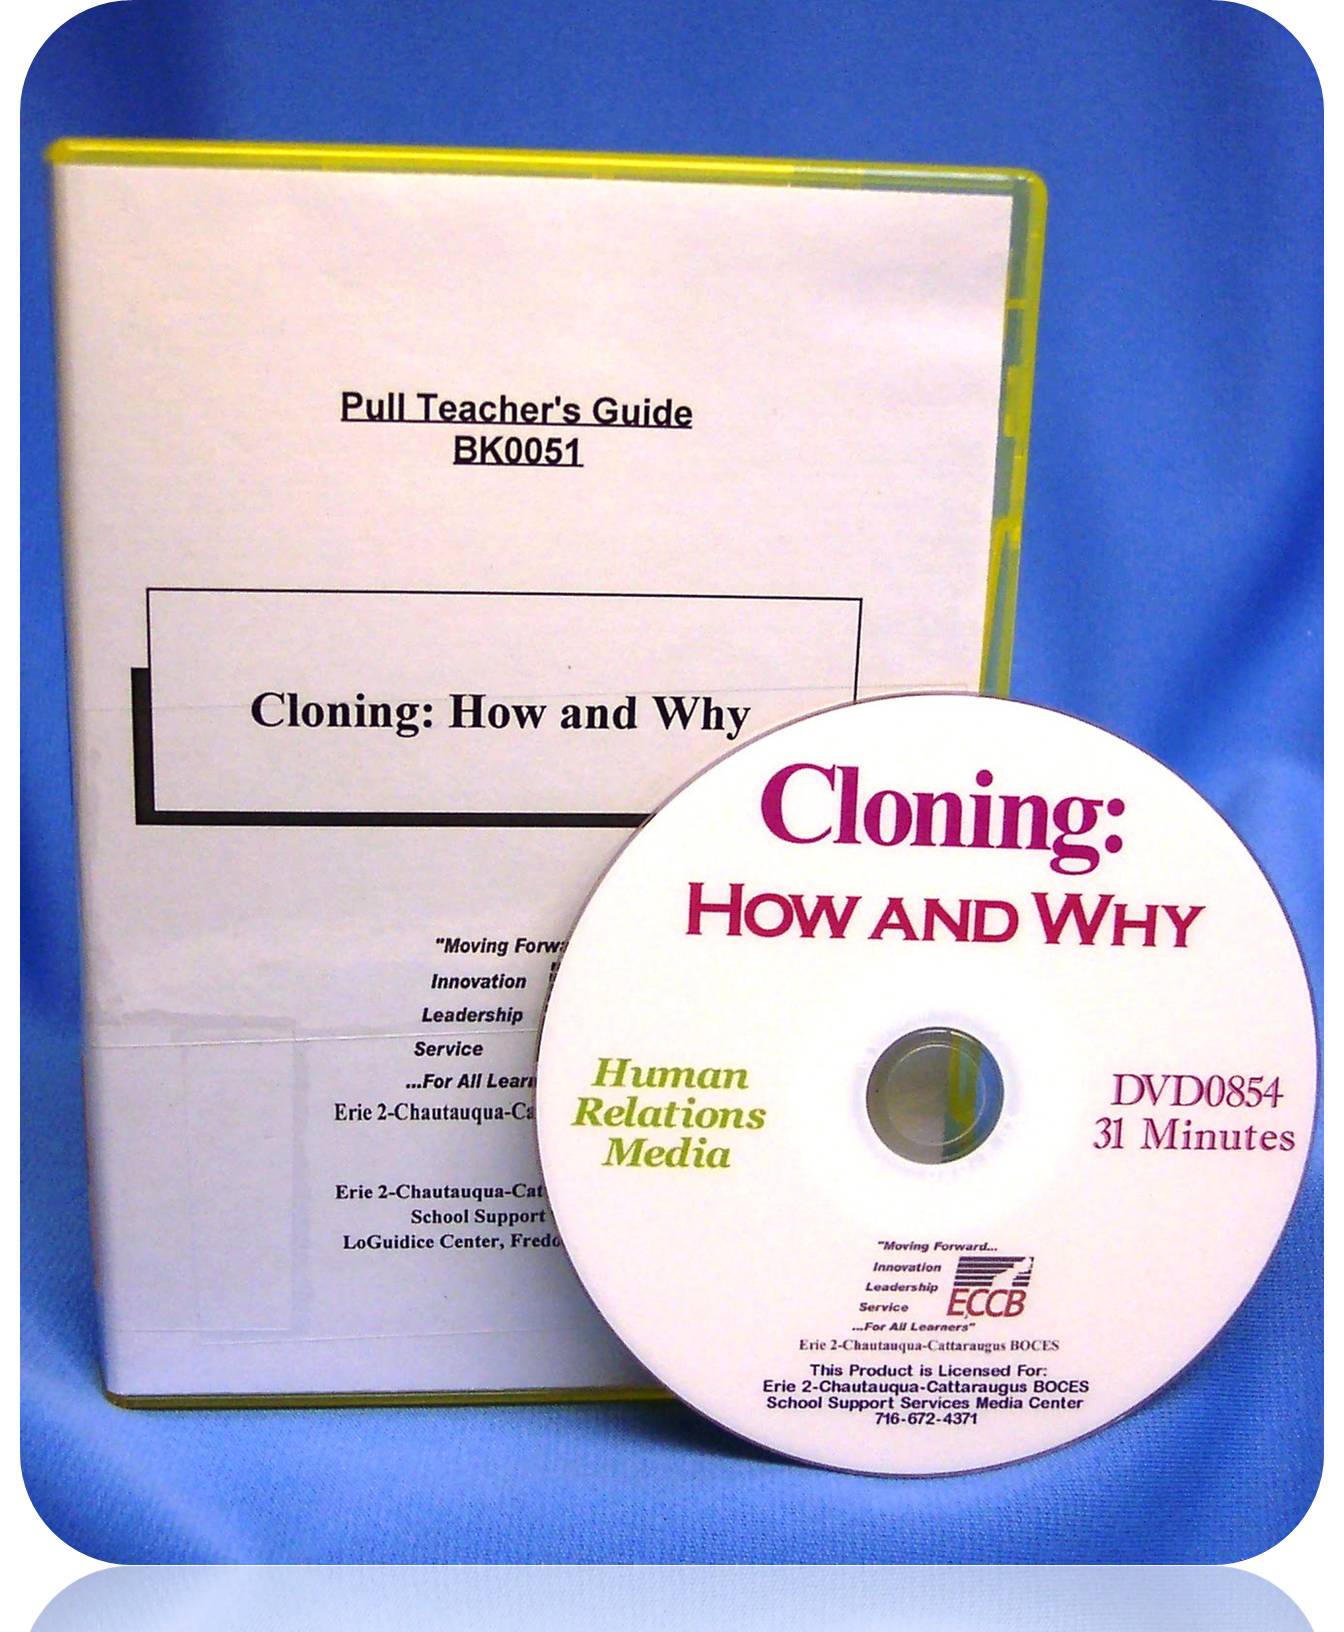 Cloning: How and Why